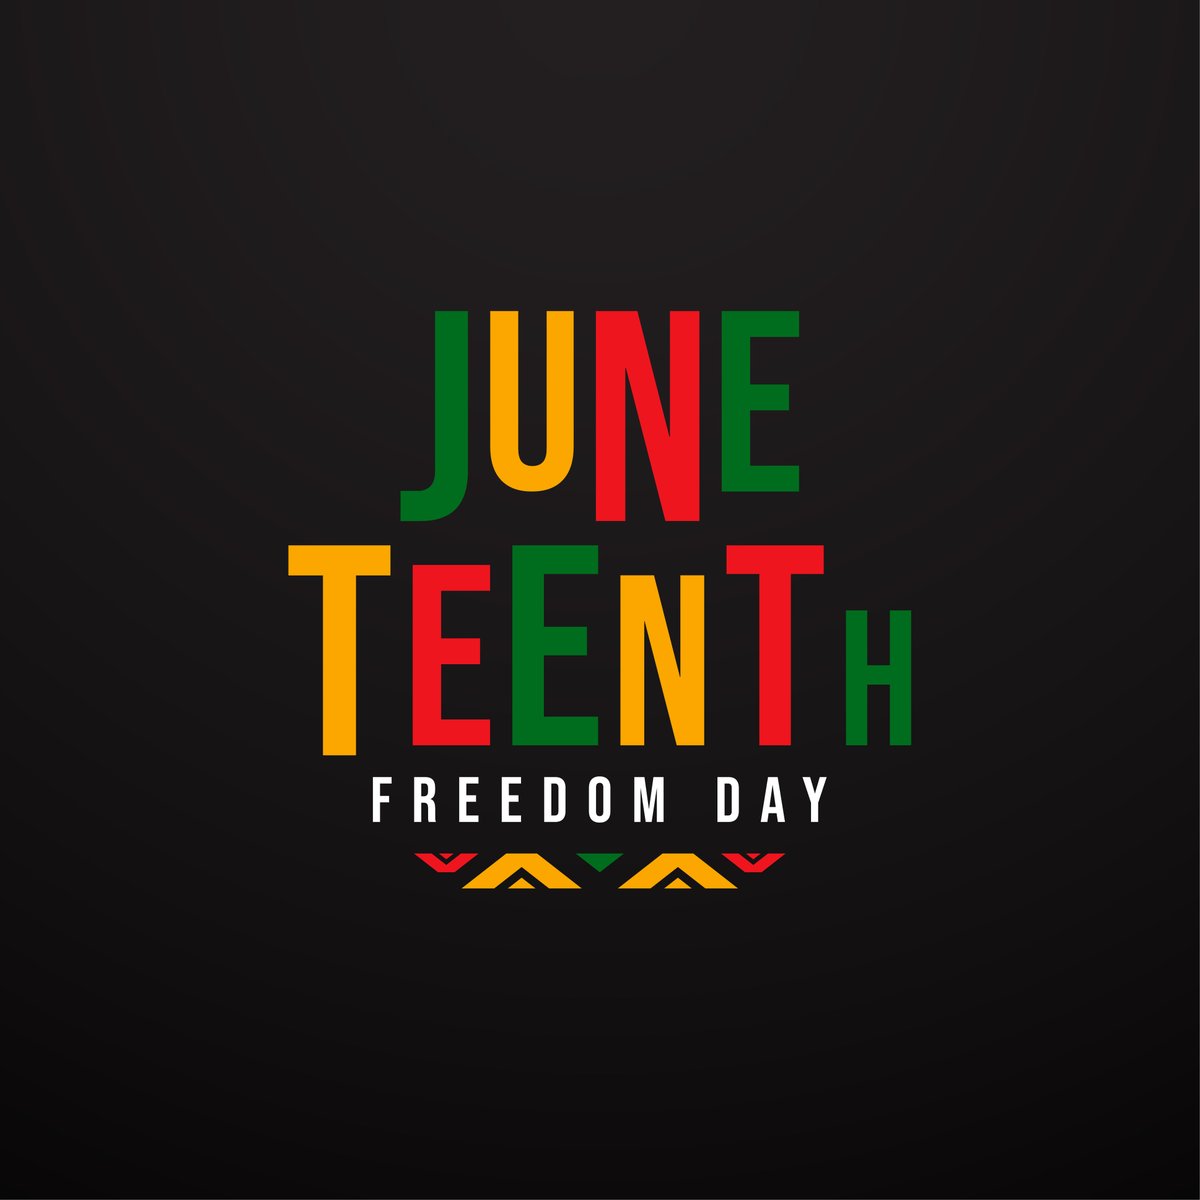 Thank you to @SenatorSantana for sponsoring and @GovWhitmer for signing legislation to make #Juneteenth an official state holiday in recognition of its importance in American and African-American history. https://t.co/9aZaYPnGIB